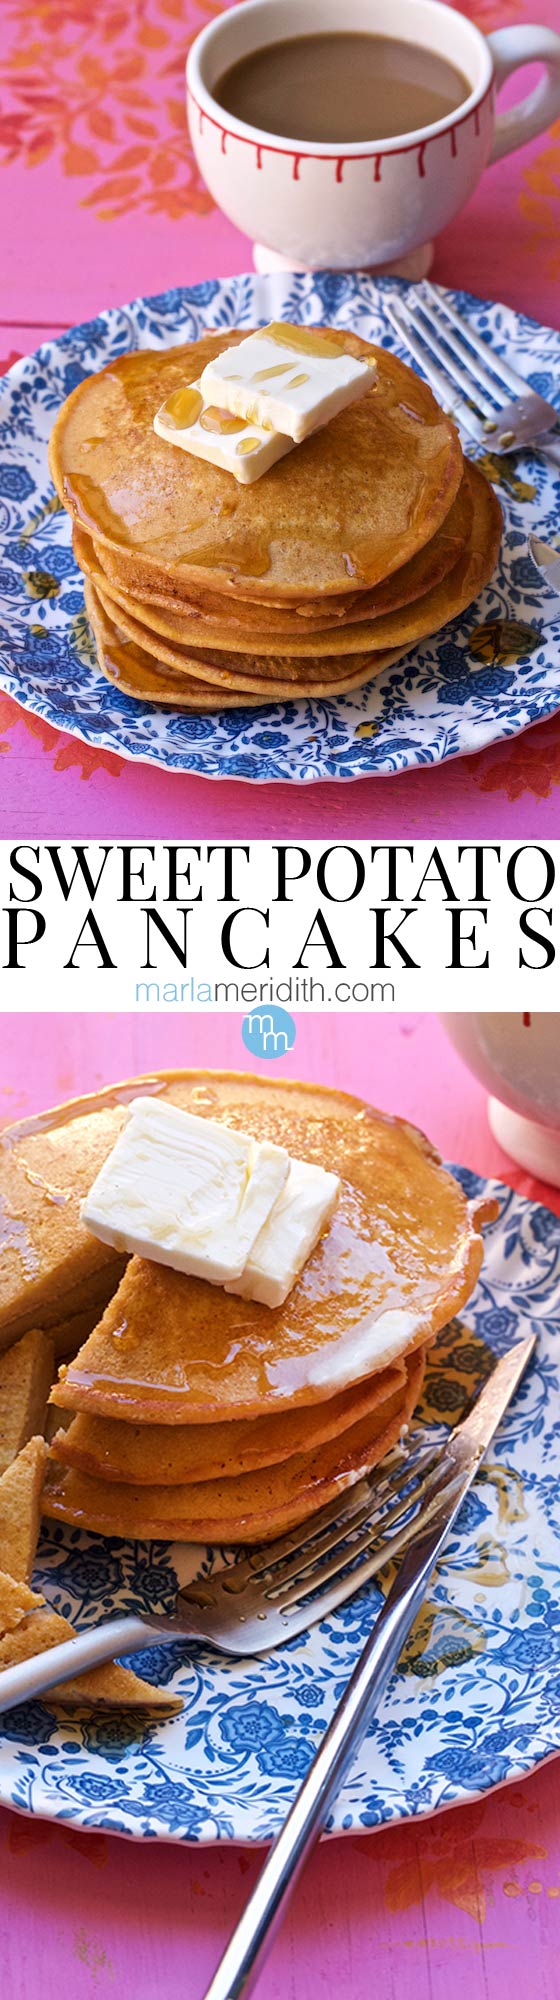 Get this delicious recipe for Sweet Potato Pancakes on MarlaMeridith.com #recipe #pancakes